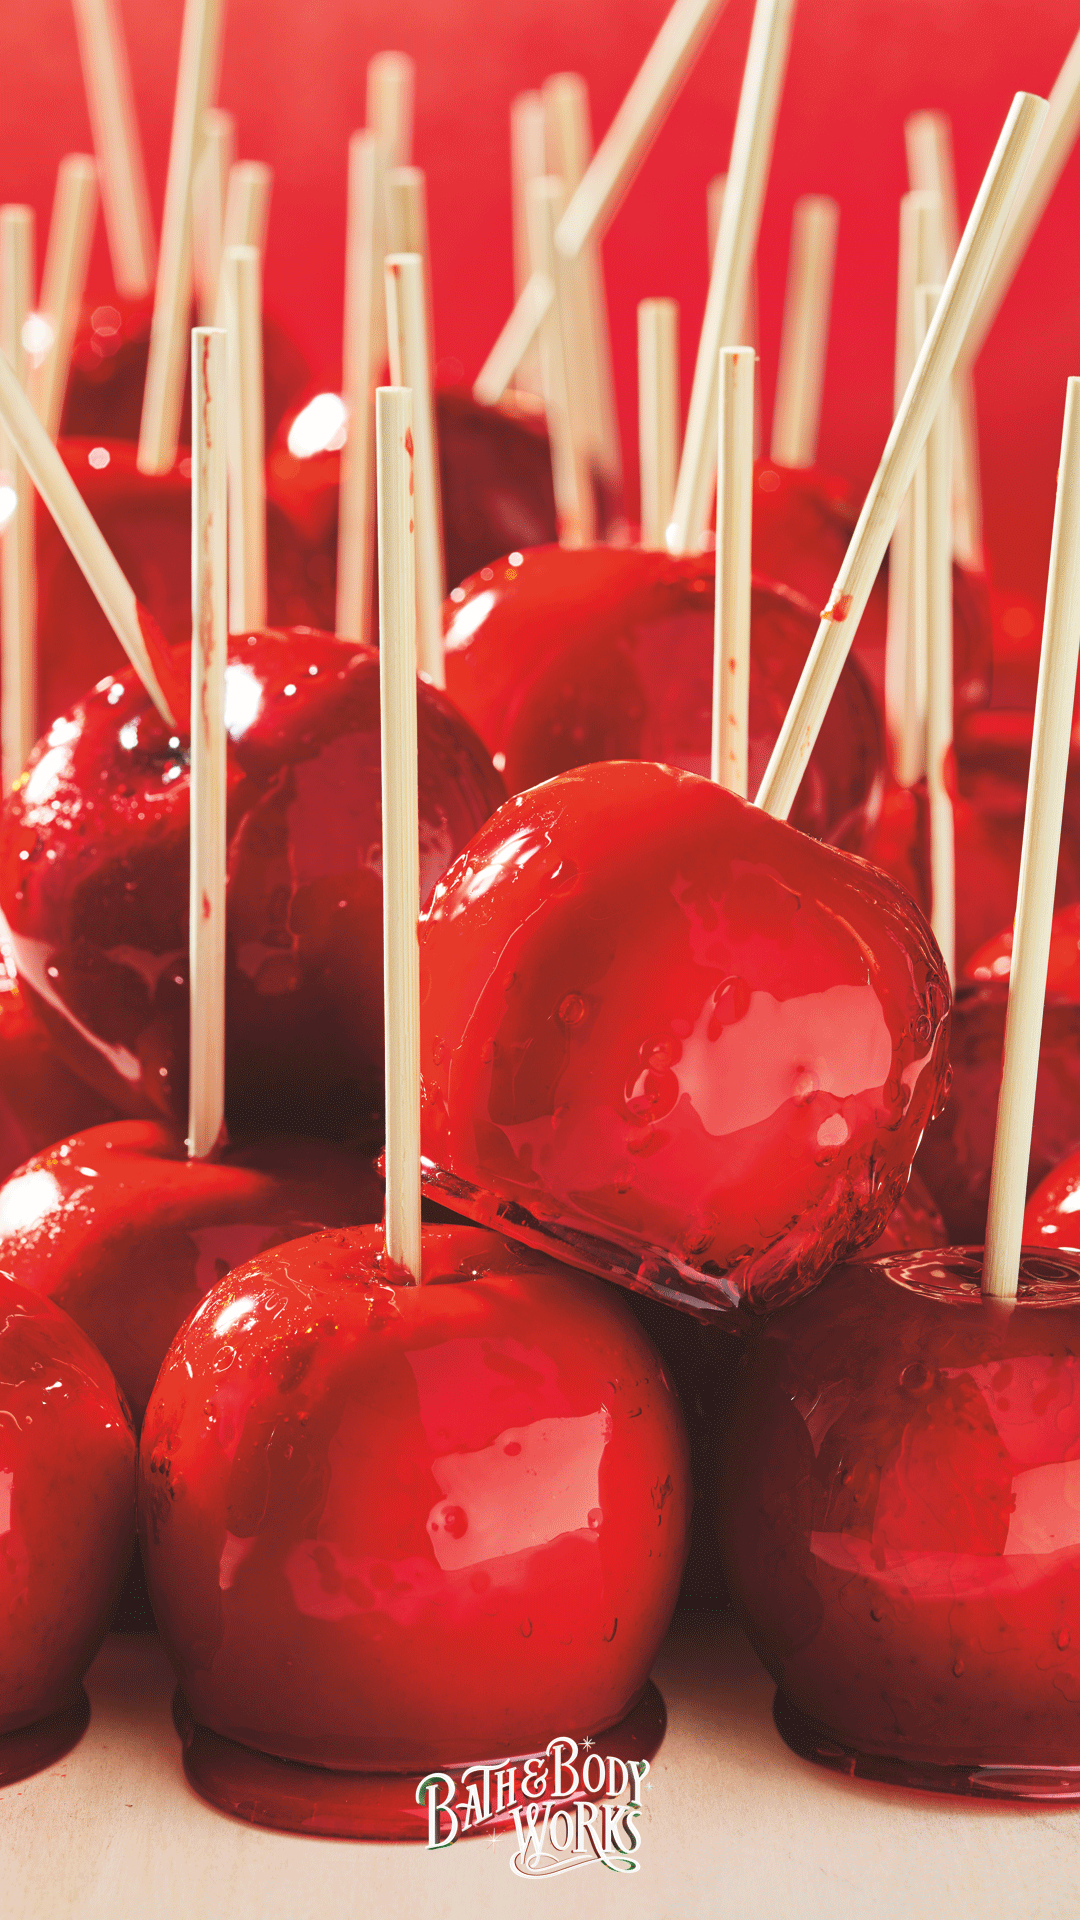 Candy Apple Wallpaper Free Candy Apple Background